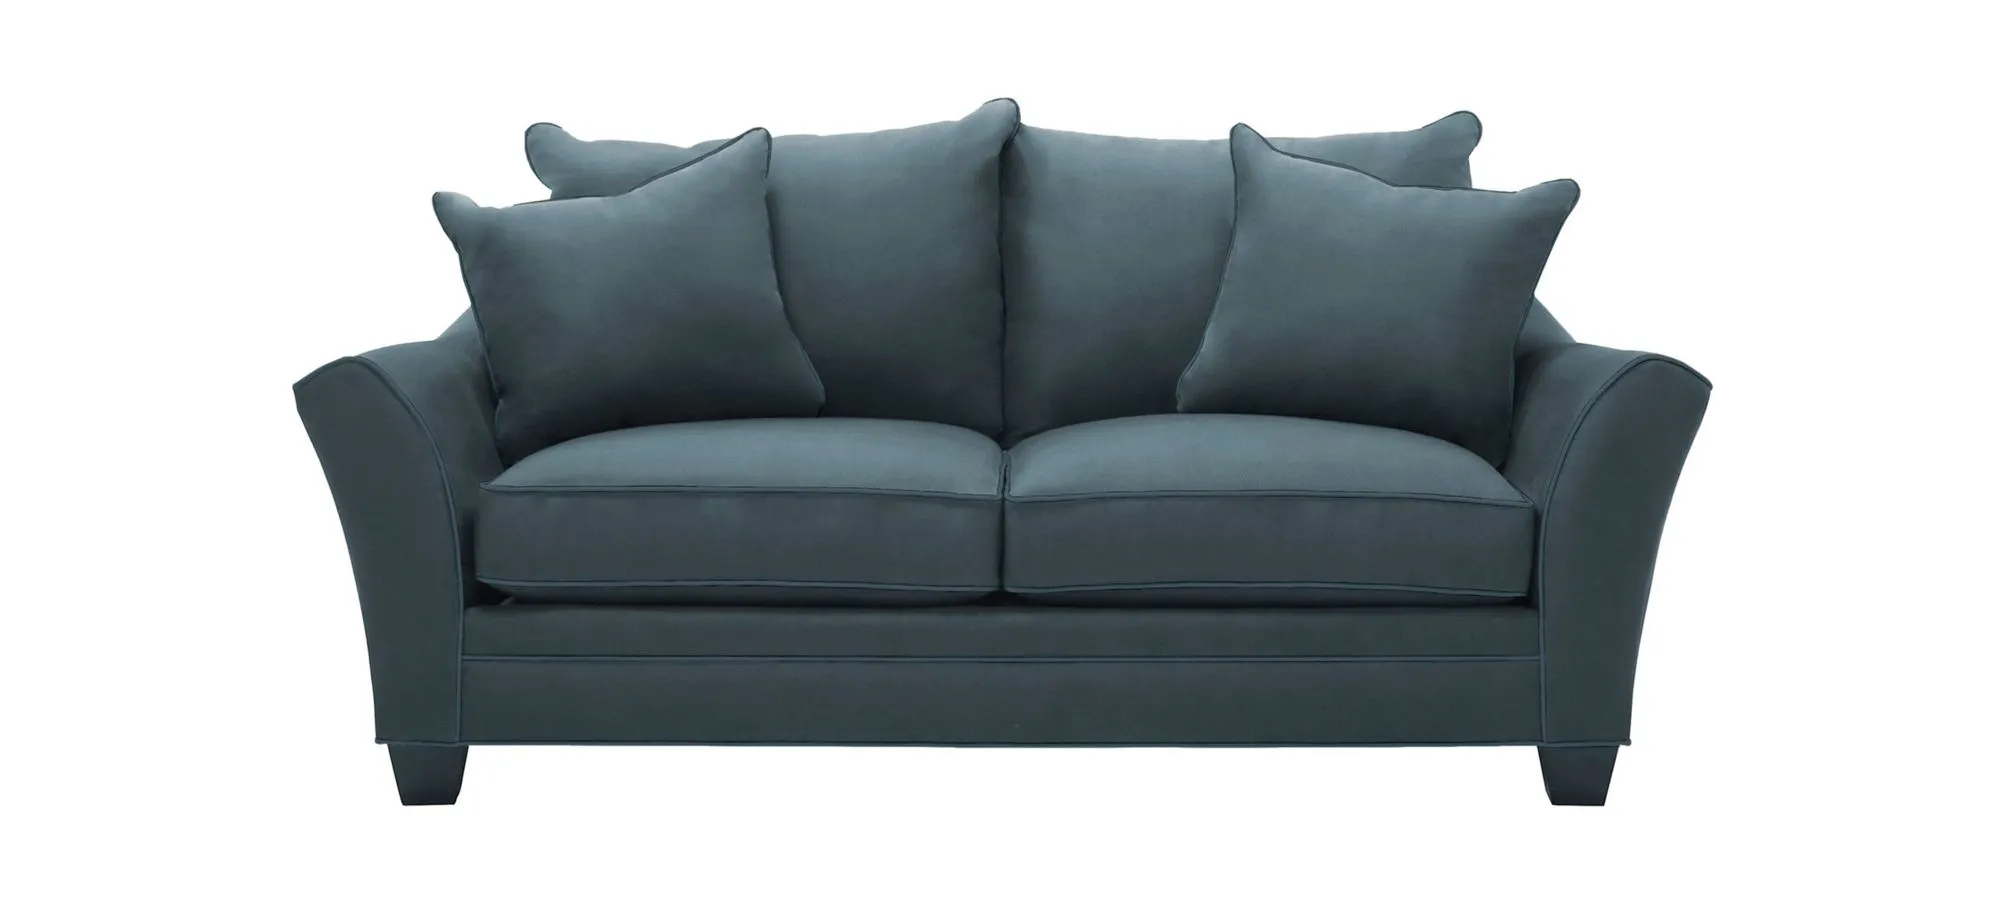 Briarwood Apartment Sofa in Suede So Soft Lagoon by H.M. Richards